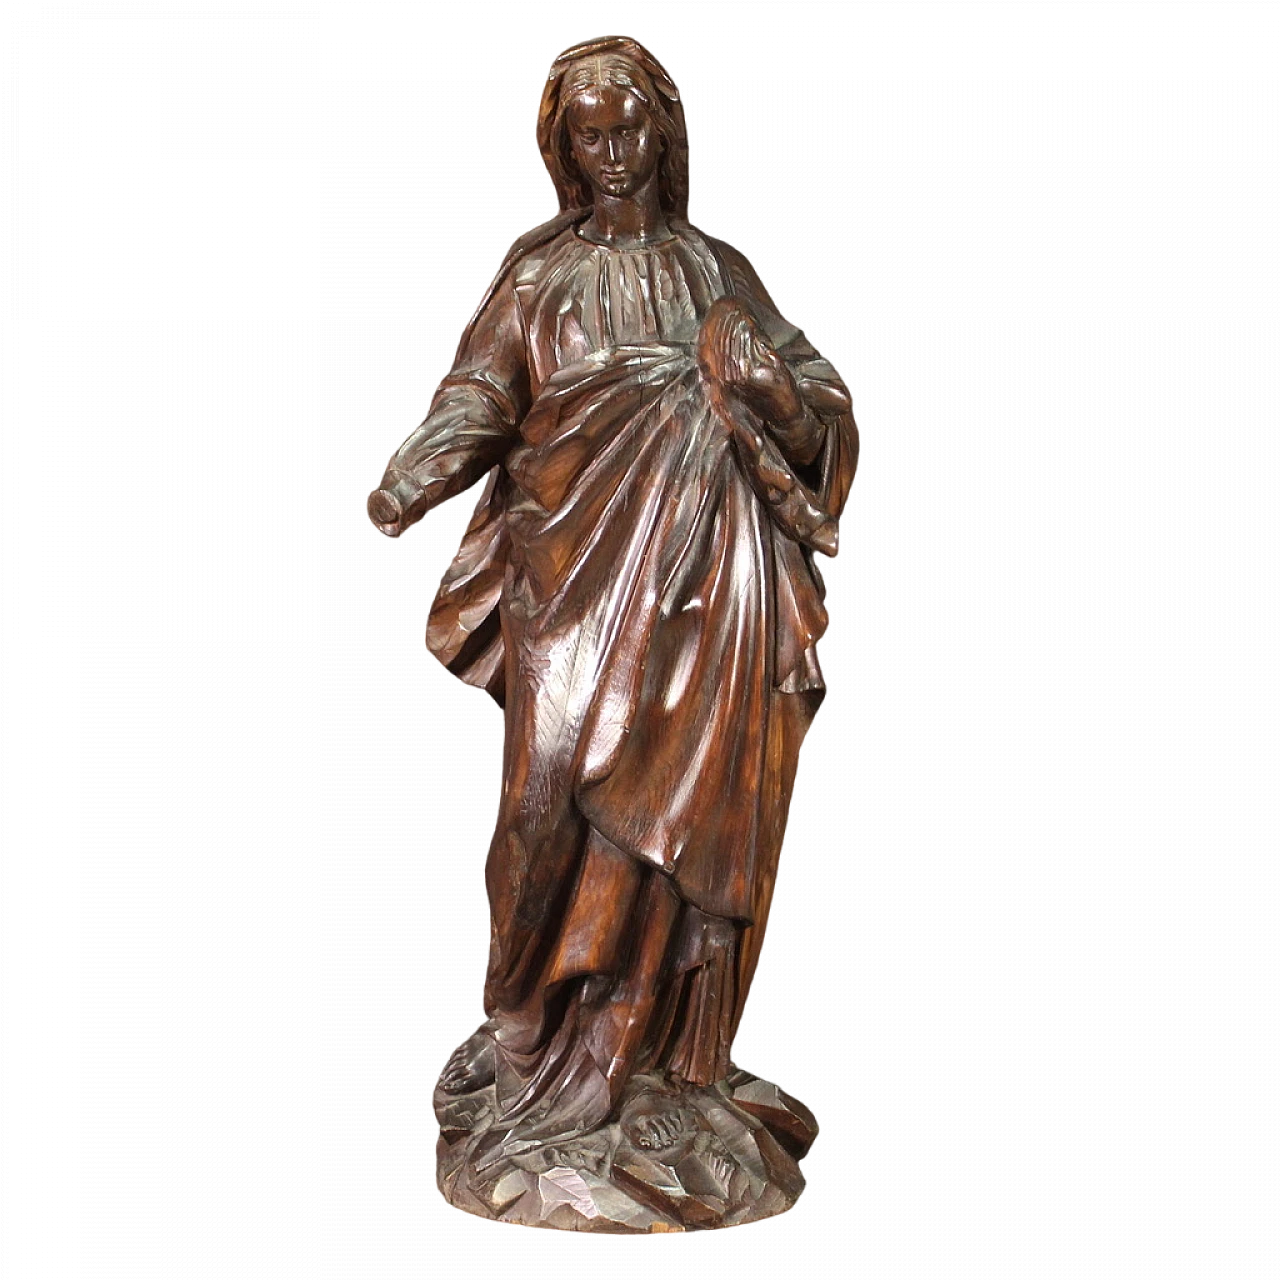 Madonna, mahogany-stained pear wood sculpture, mid-19th century 13